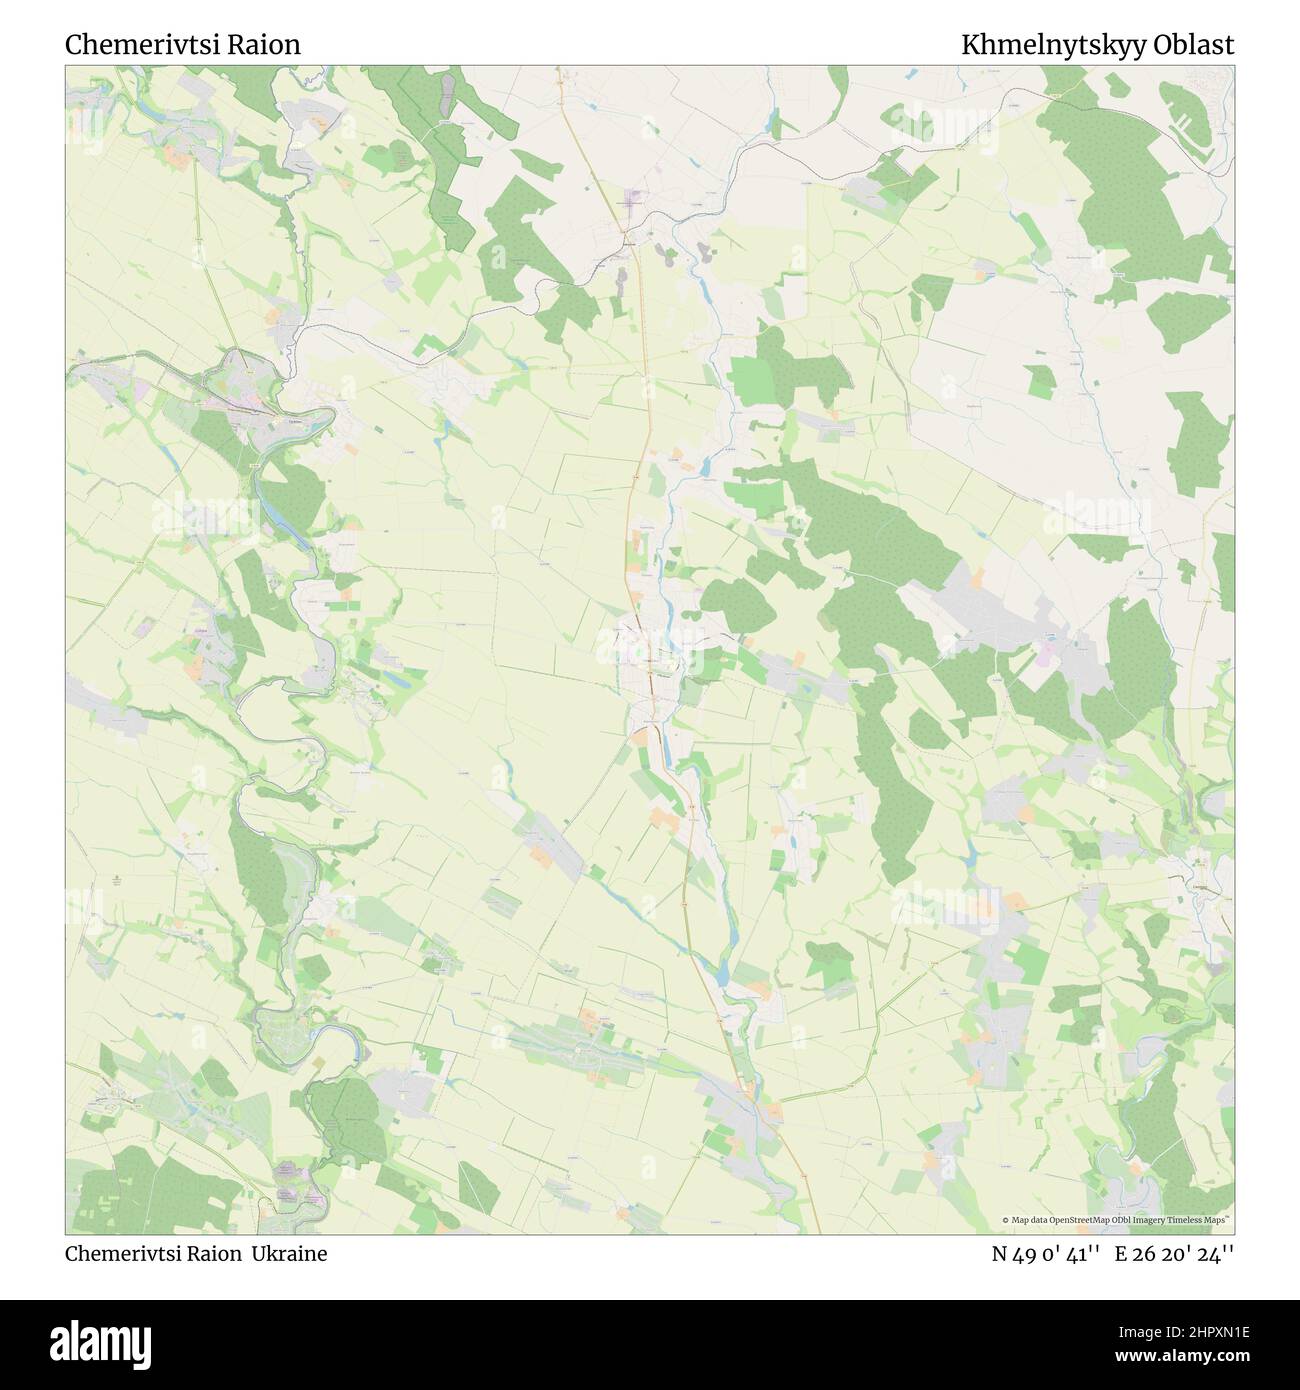 Chemerivtsi Raion, Chemerivtsi Raion, Ukraine, Khmelnytskyy Oblast, N 49 0' 41'', E 26 20' 24'', map, Timeless Map published in 2021. Travelers, explorers and adventurers like Florence Nightingale, David Livingstone, Ernest Shackleton, Lewis and Clark and Sherlock Holmes relied on maps to plan travels to the world's most remote corners, Timeless Maps is mapping most locations on the globe, showing the achievement of great dreams Stock Photo